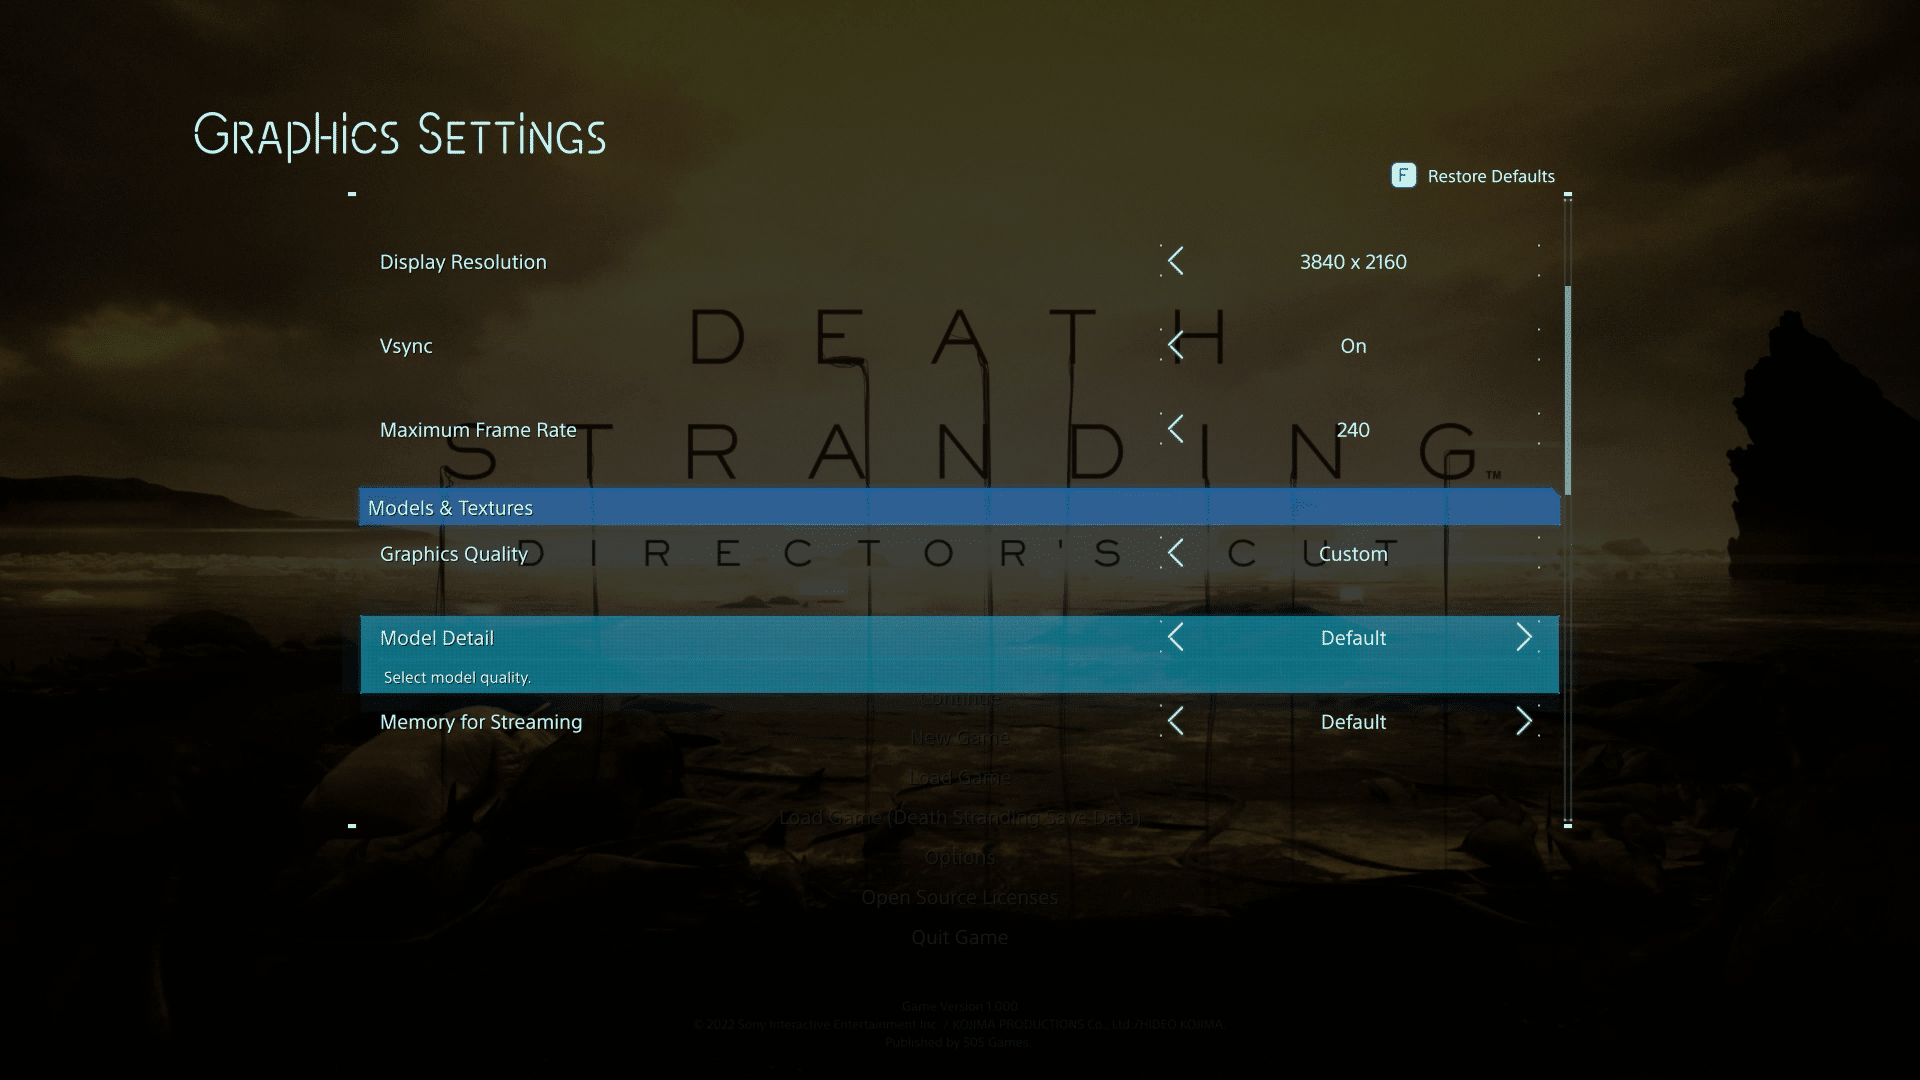 Metacritic - DEATH STRANDING [PS4 - 82] comes to PC on July 14